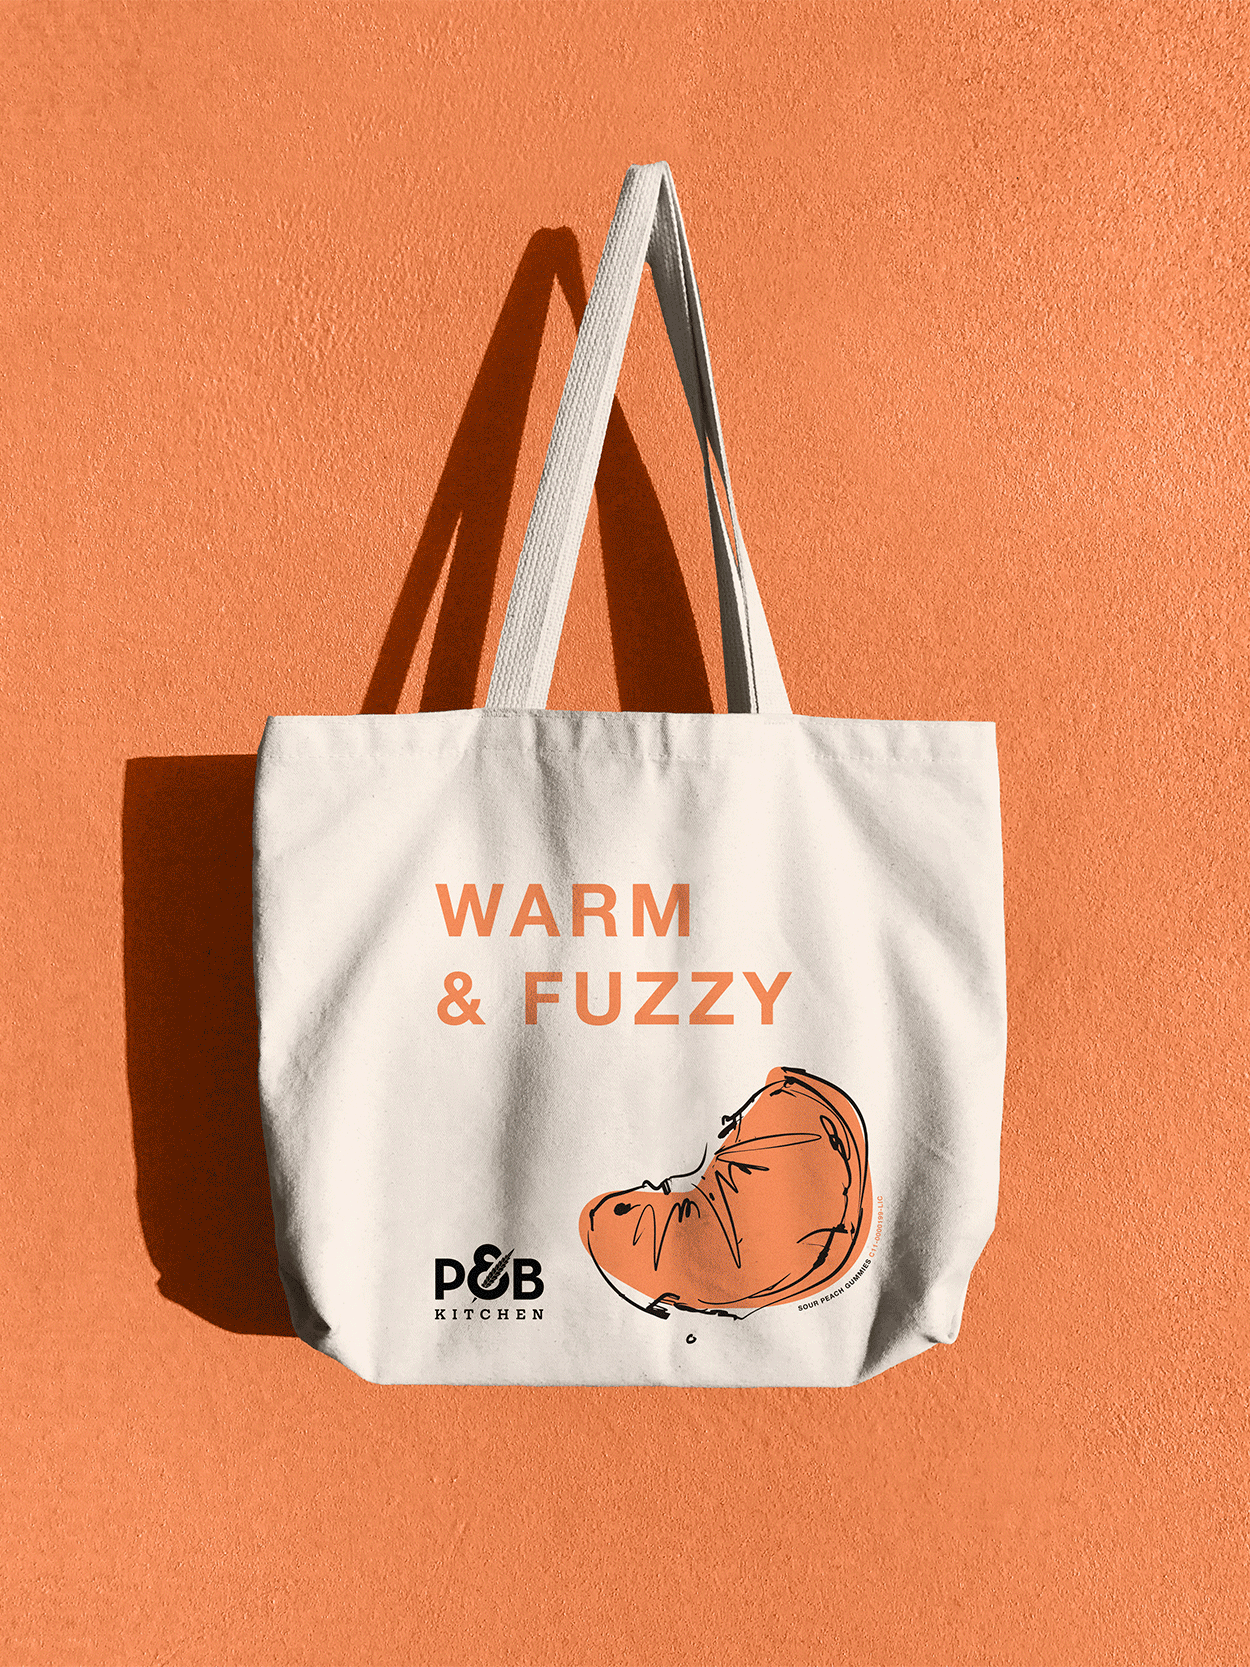 P&BKitchen_ToteBags.gif